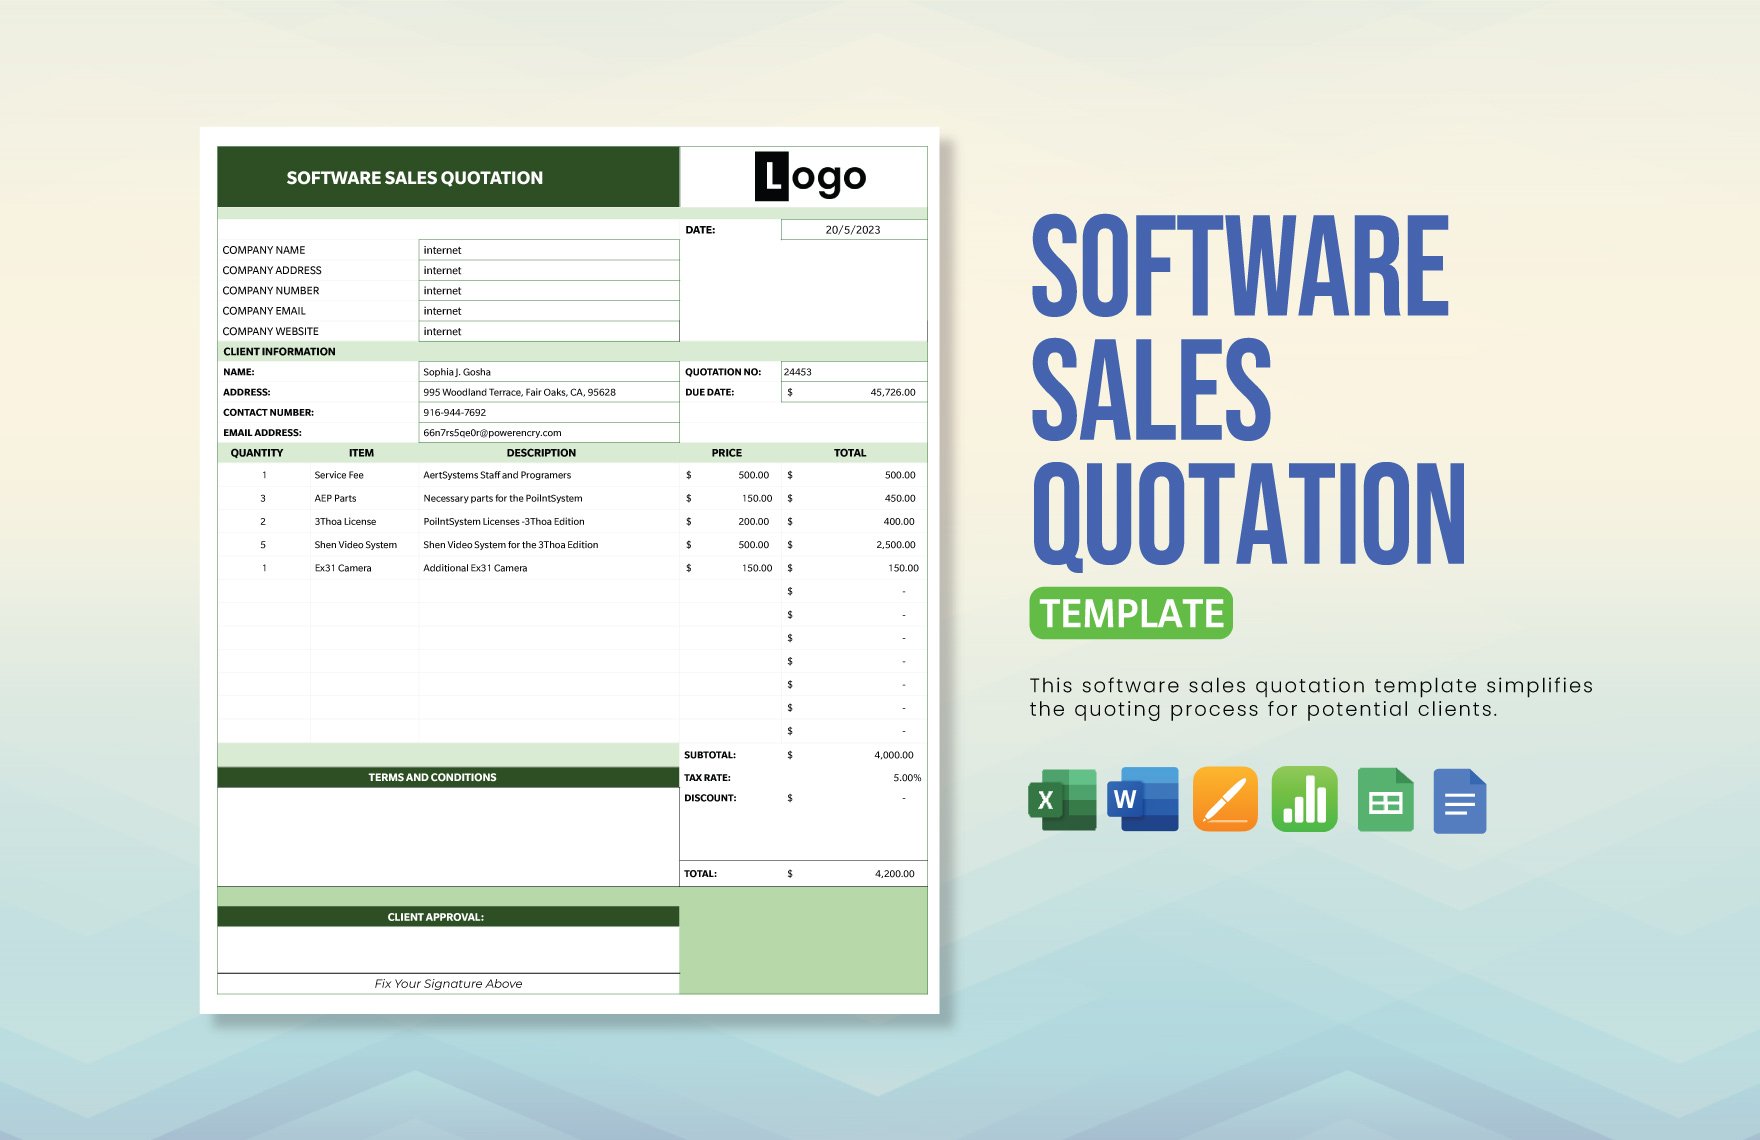 Software Sales Quotation Template